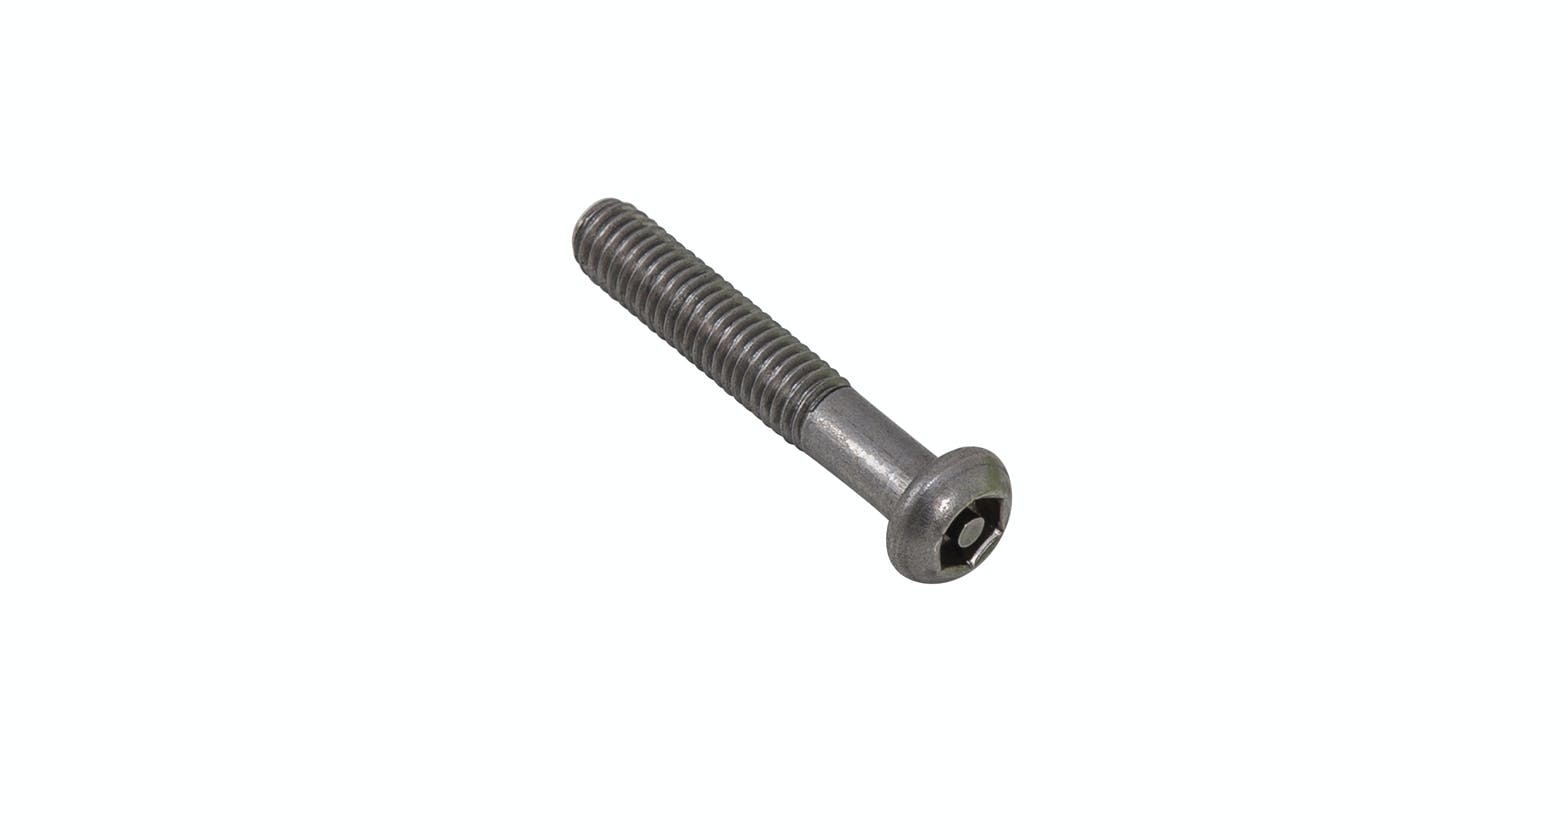 Rhino-Rack B092-BP M6 x 35mm Button Head Security Screw (Stainless Steel) (6 Pack)